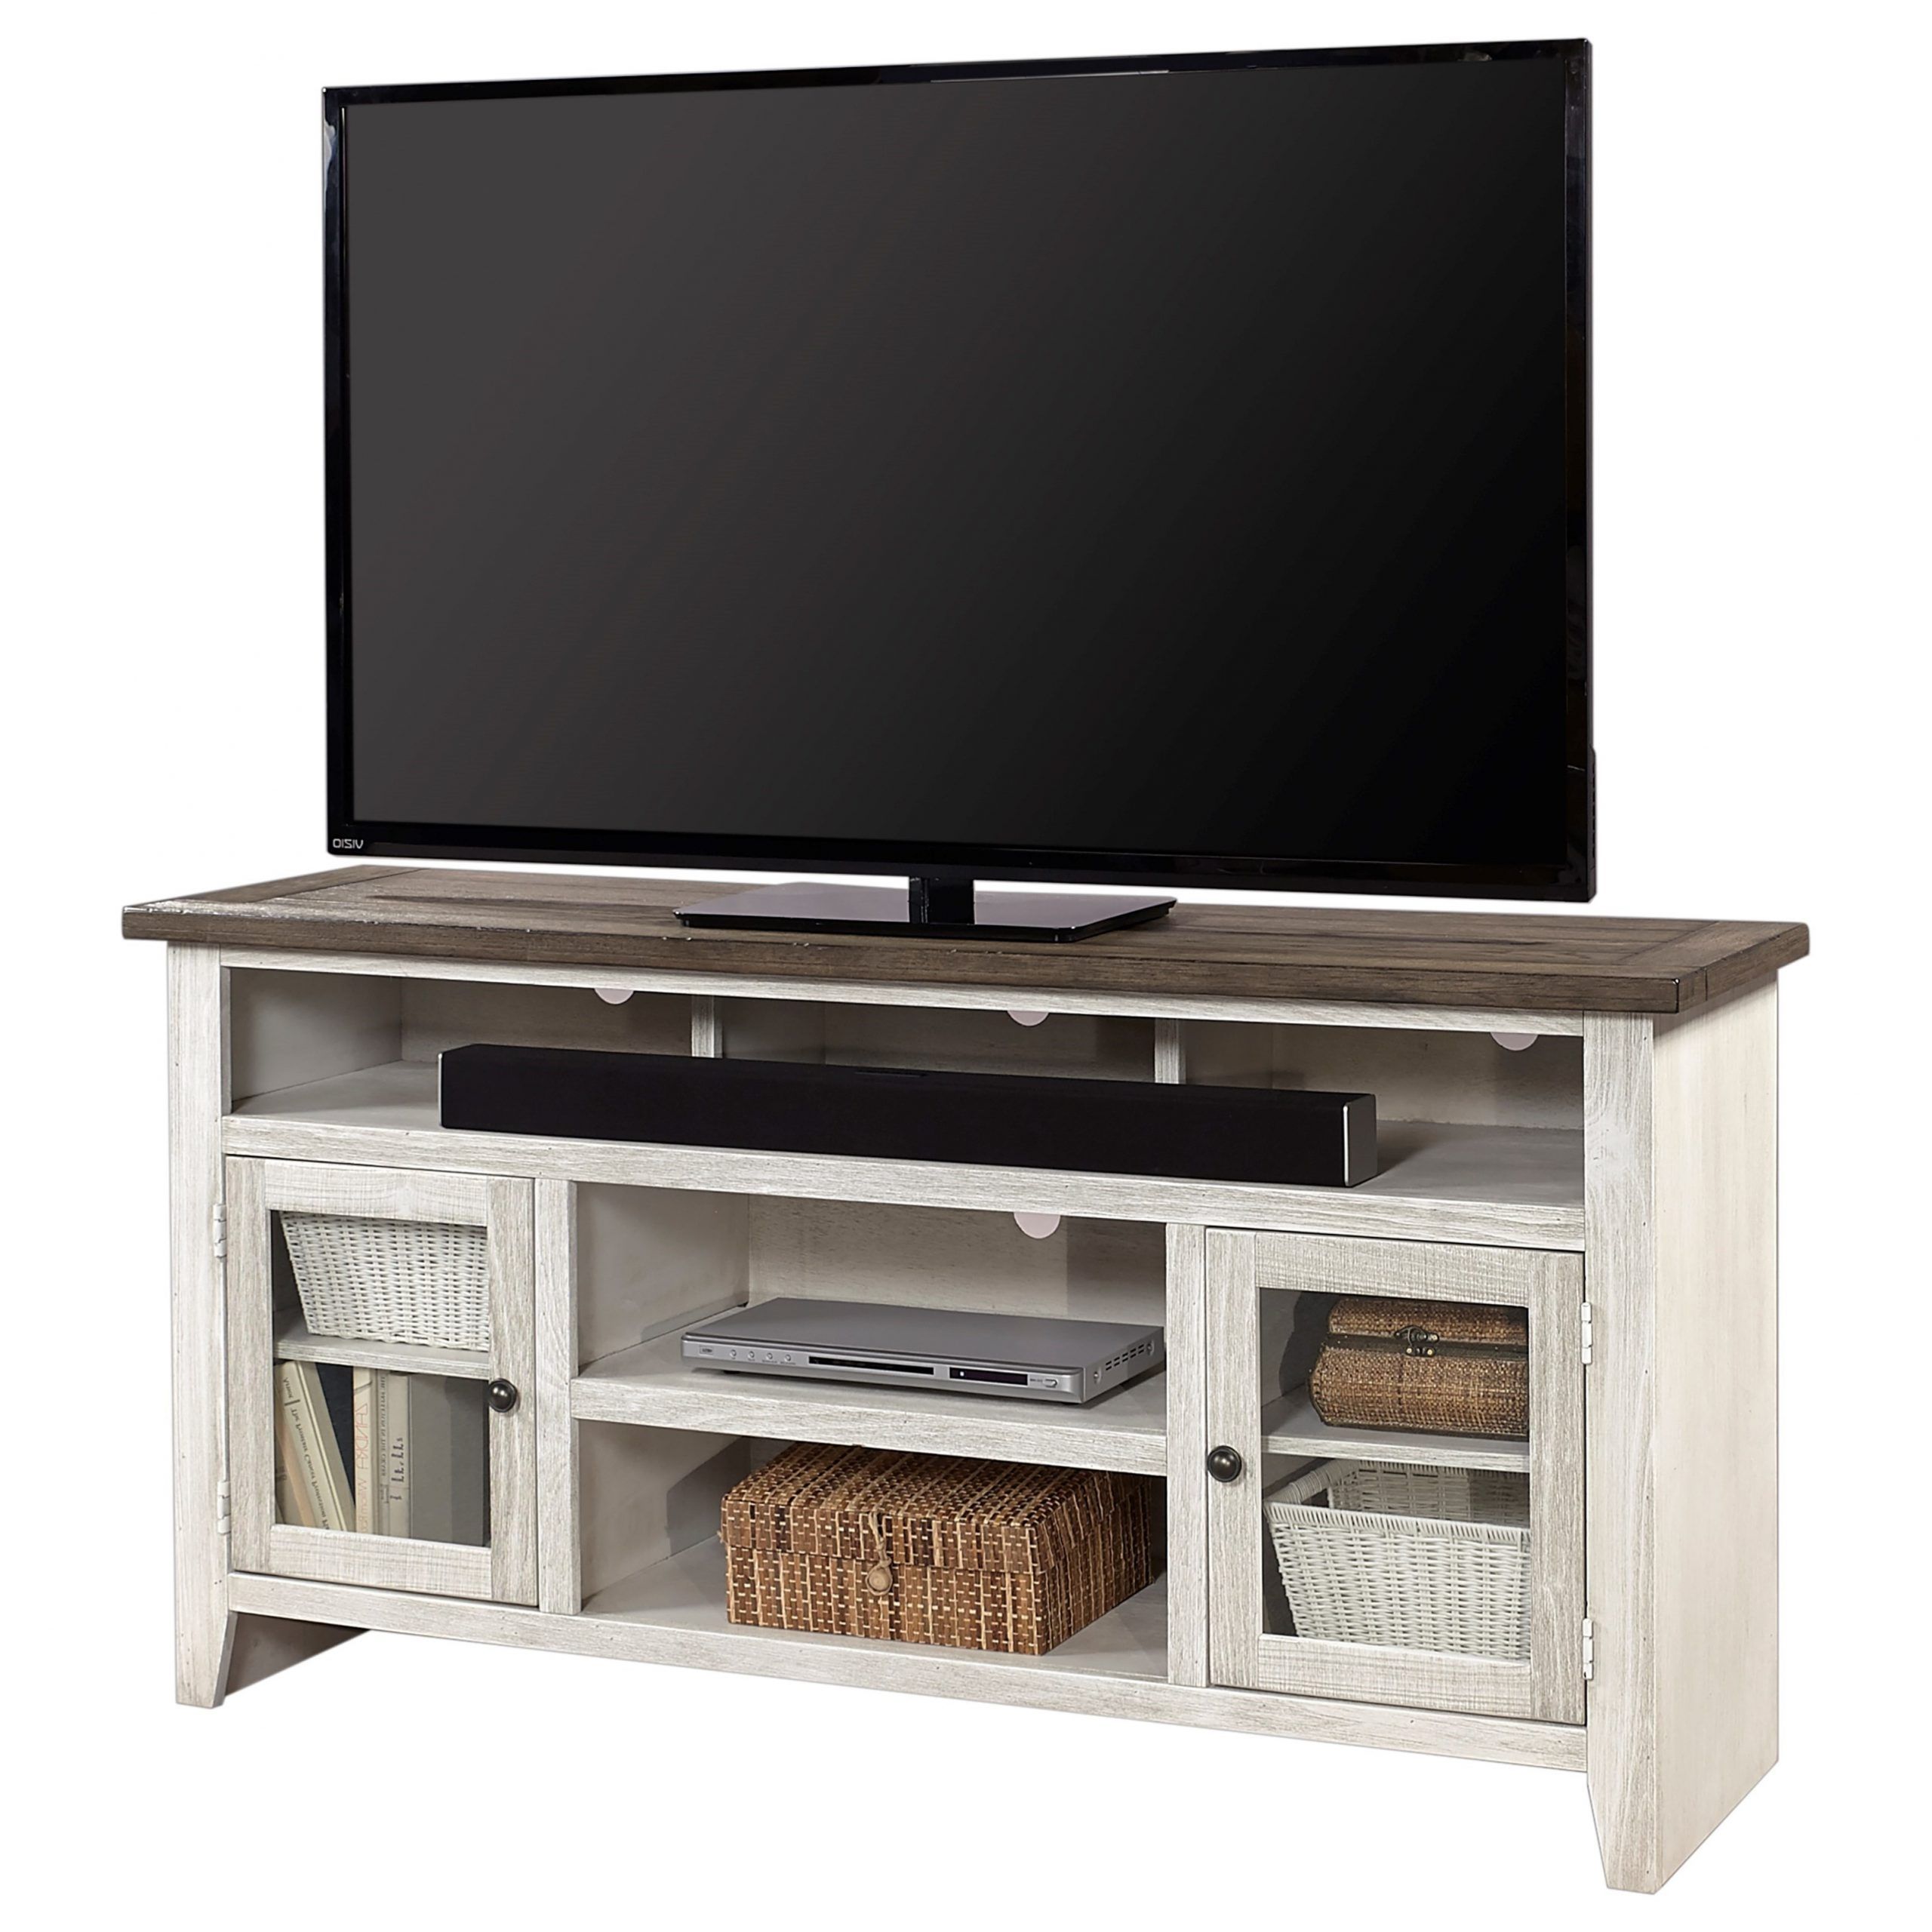 Aspenhome Eastport 65" Console With Soundbar Compartment Regarding Trendy Argus Tv Stands For Tvs Up To 65" (View 13 of 20)